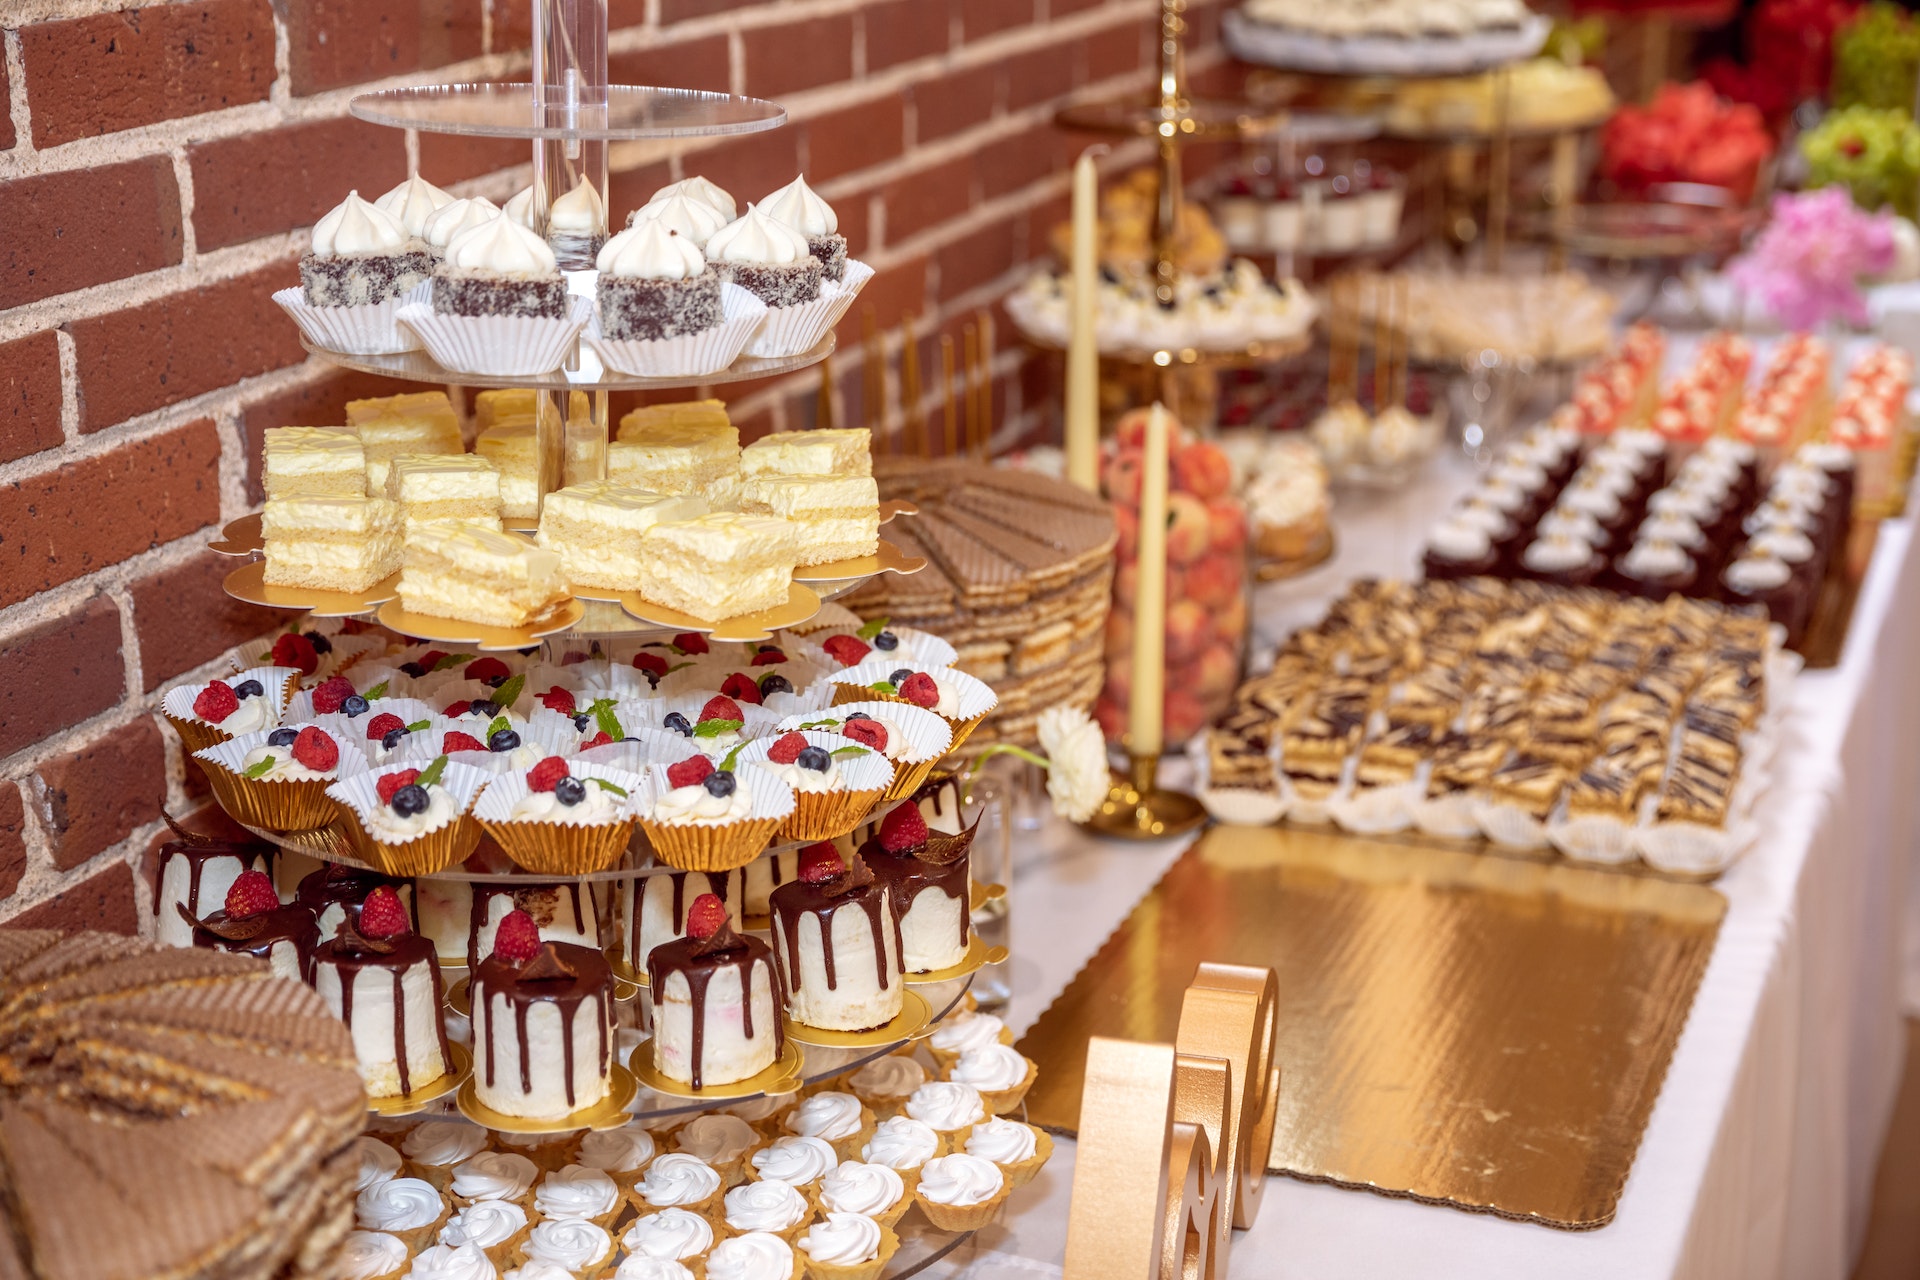 Dessert table with a variety of cakes.